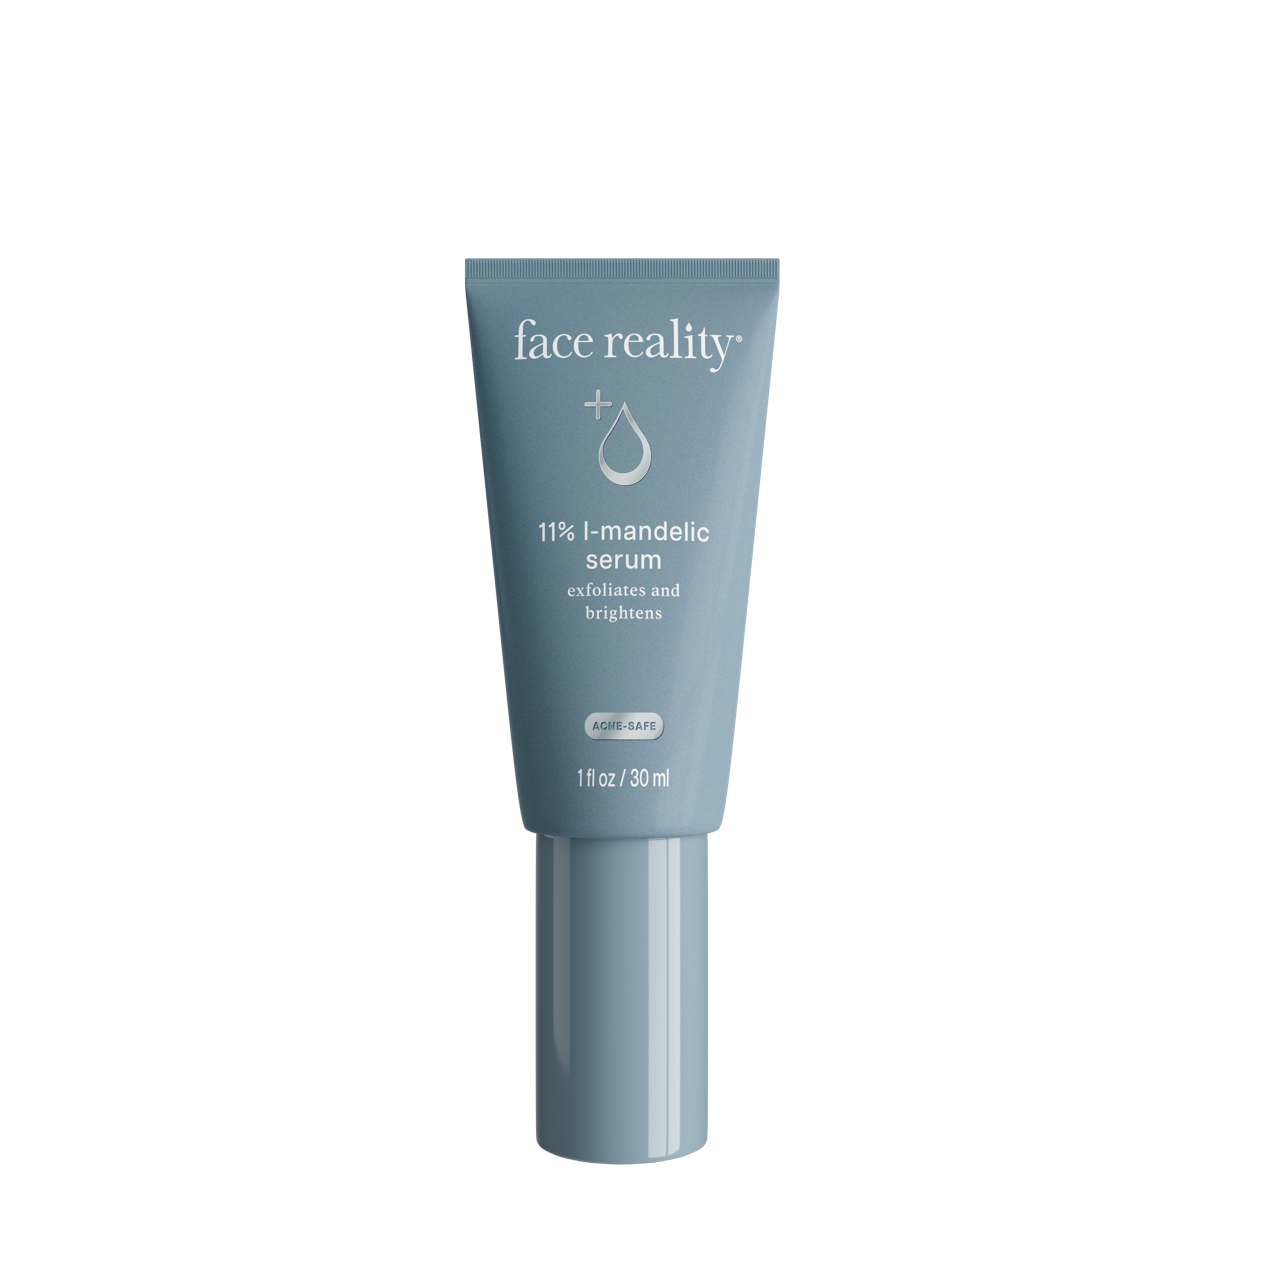 Face Reality serum gently improves skin texture